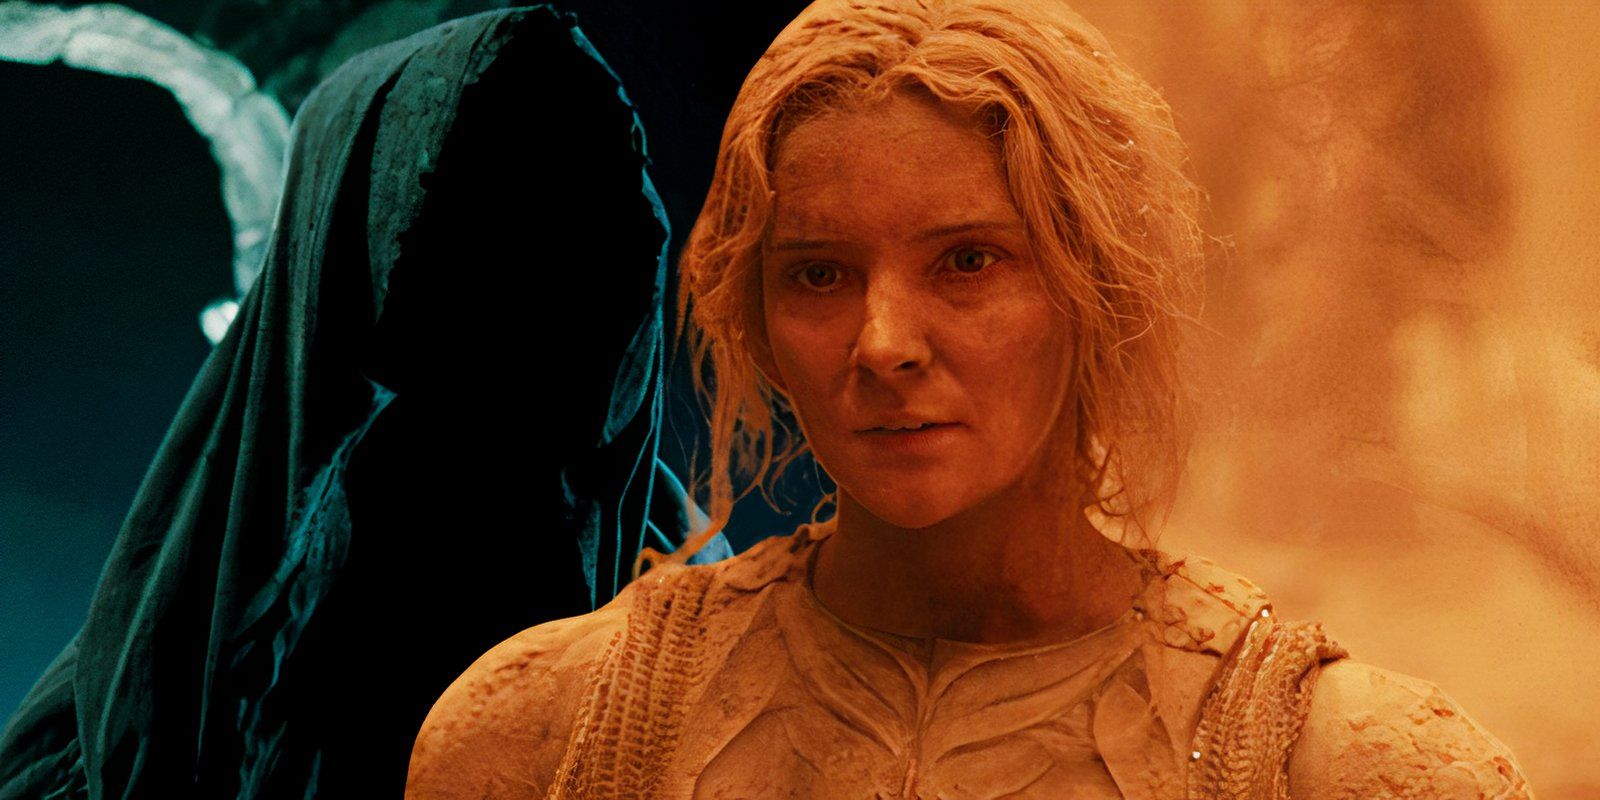 Morfydd Clark as Galadriel in The Rings of Power juxtaposed with a Nazgul in The Lord of the Rings The Fellowship of the Ring